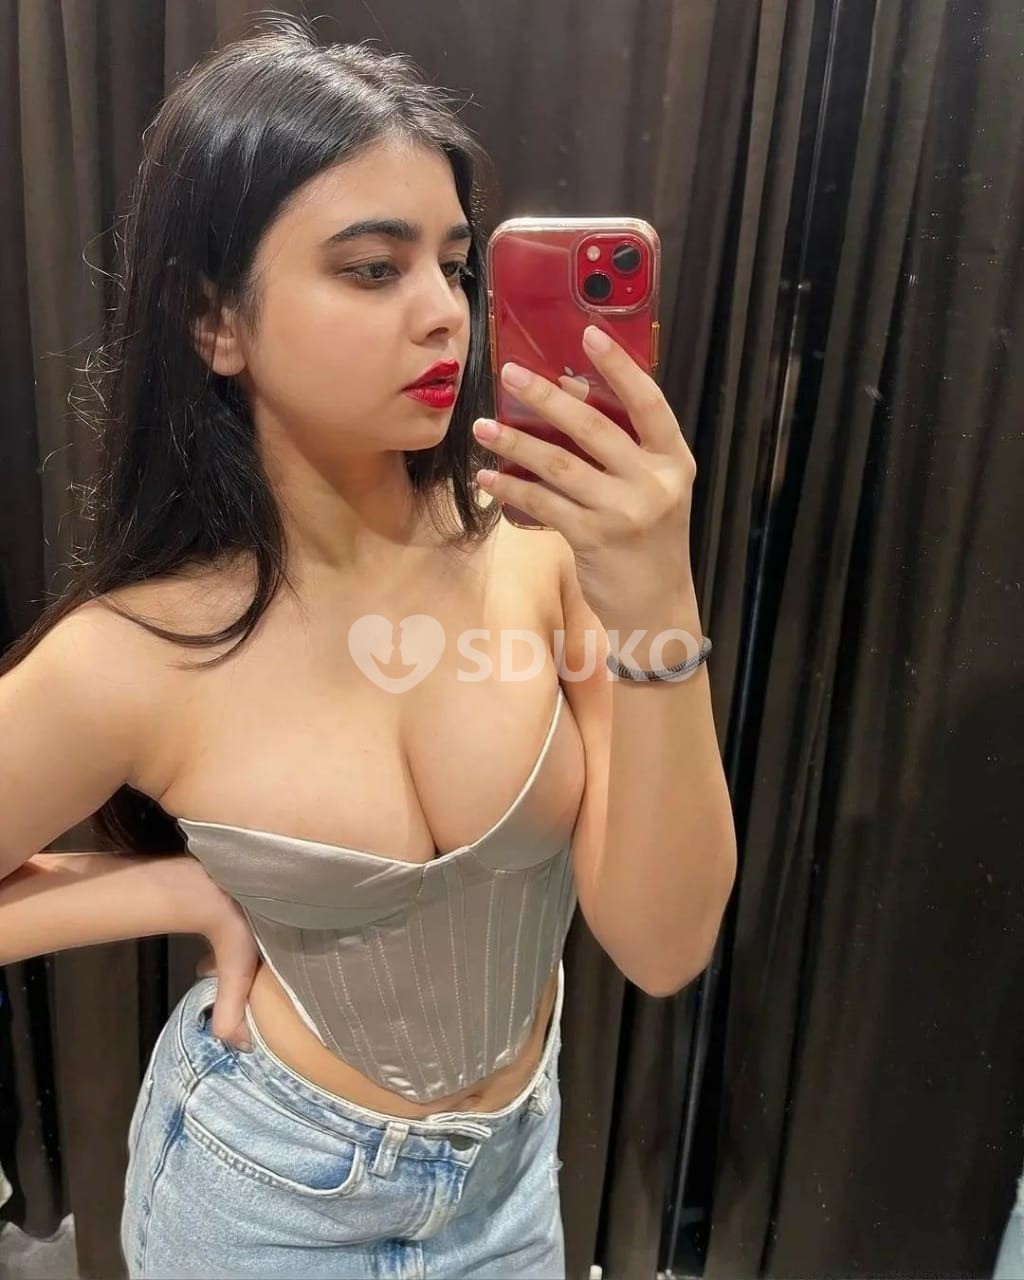 KOTHRUD VIP TODAY LOW:/ PRICE ESCORT 🥰SERVICE 100% SAFE AND SECURE ANYTIME CALL ME 24 X 7 SERVICE AVAILABLE 100% SAFE